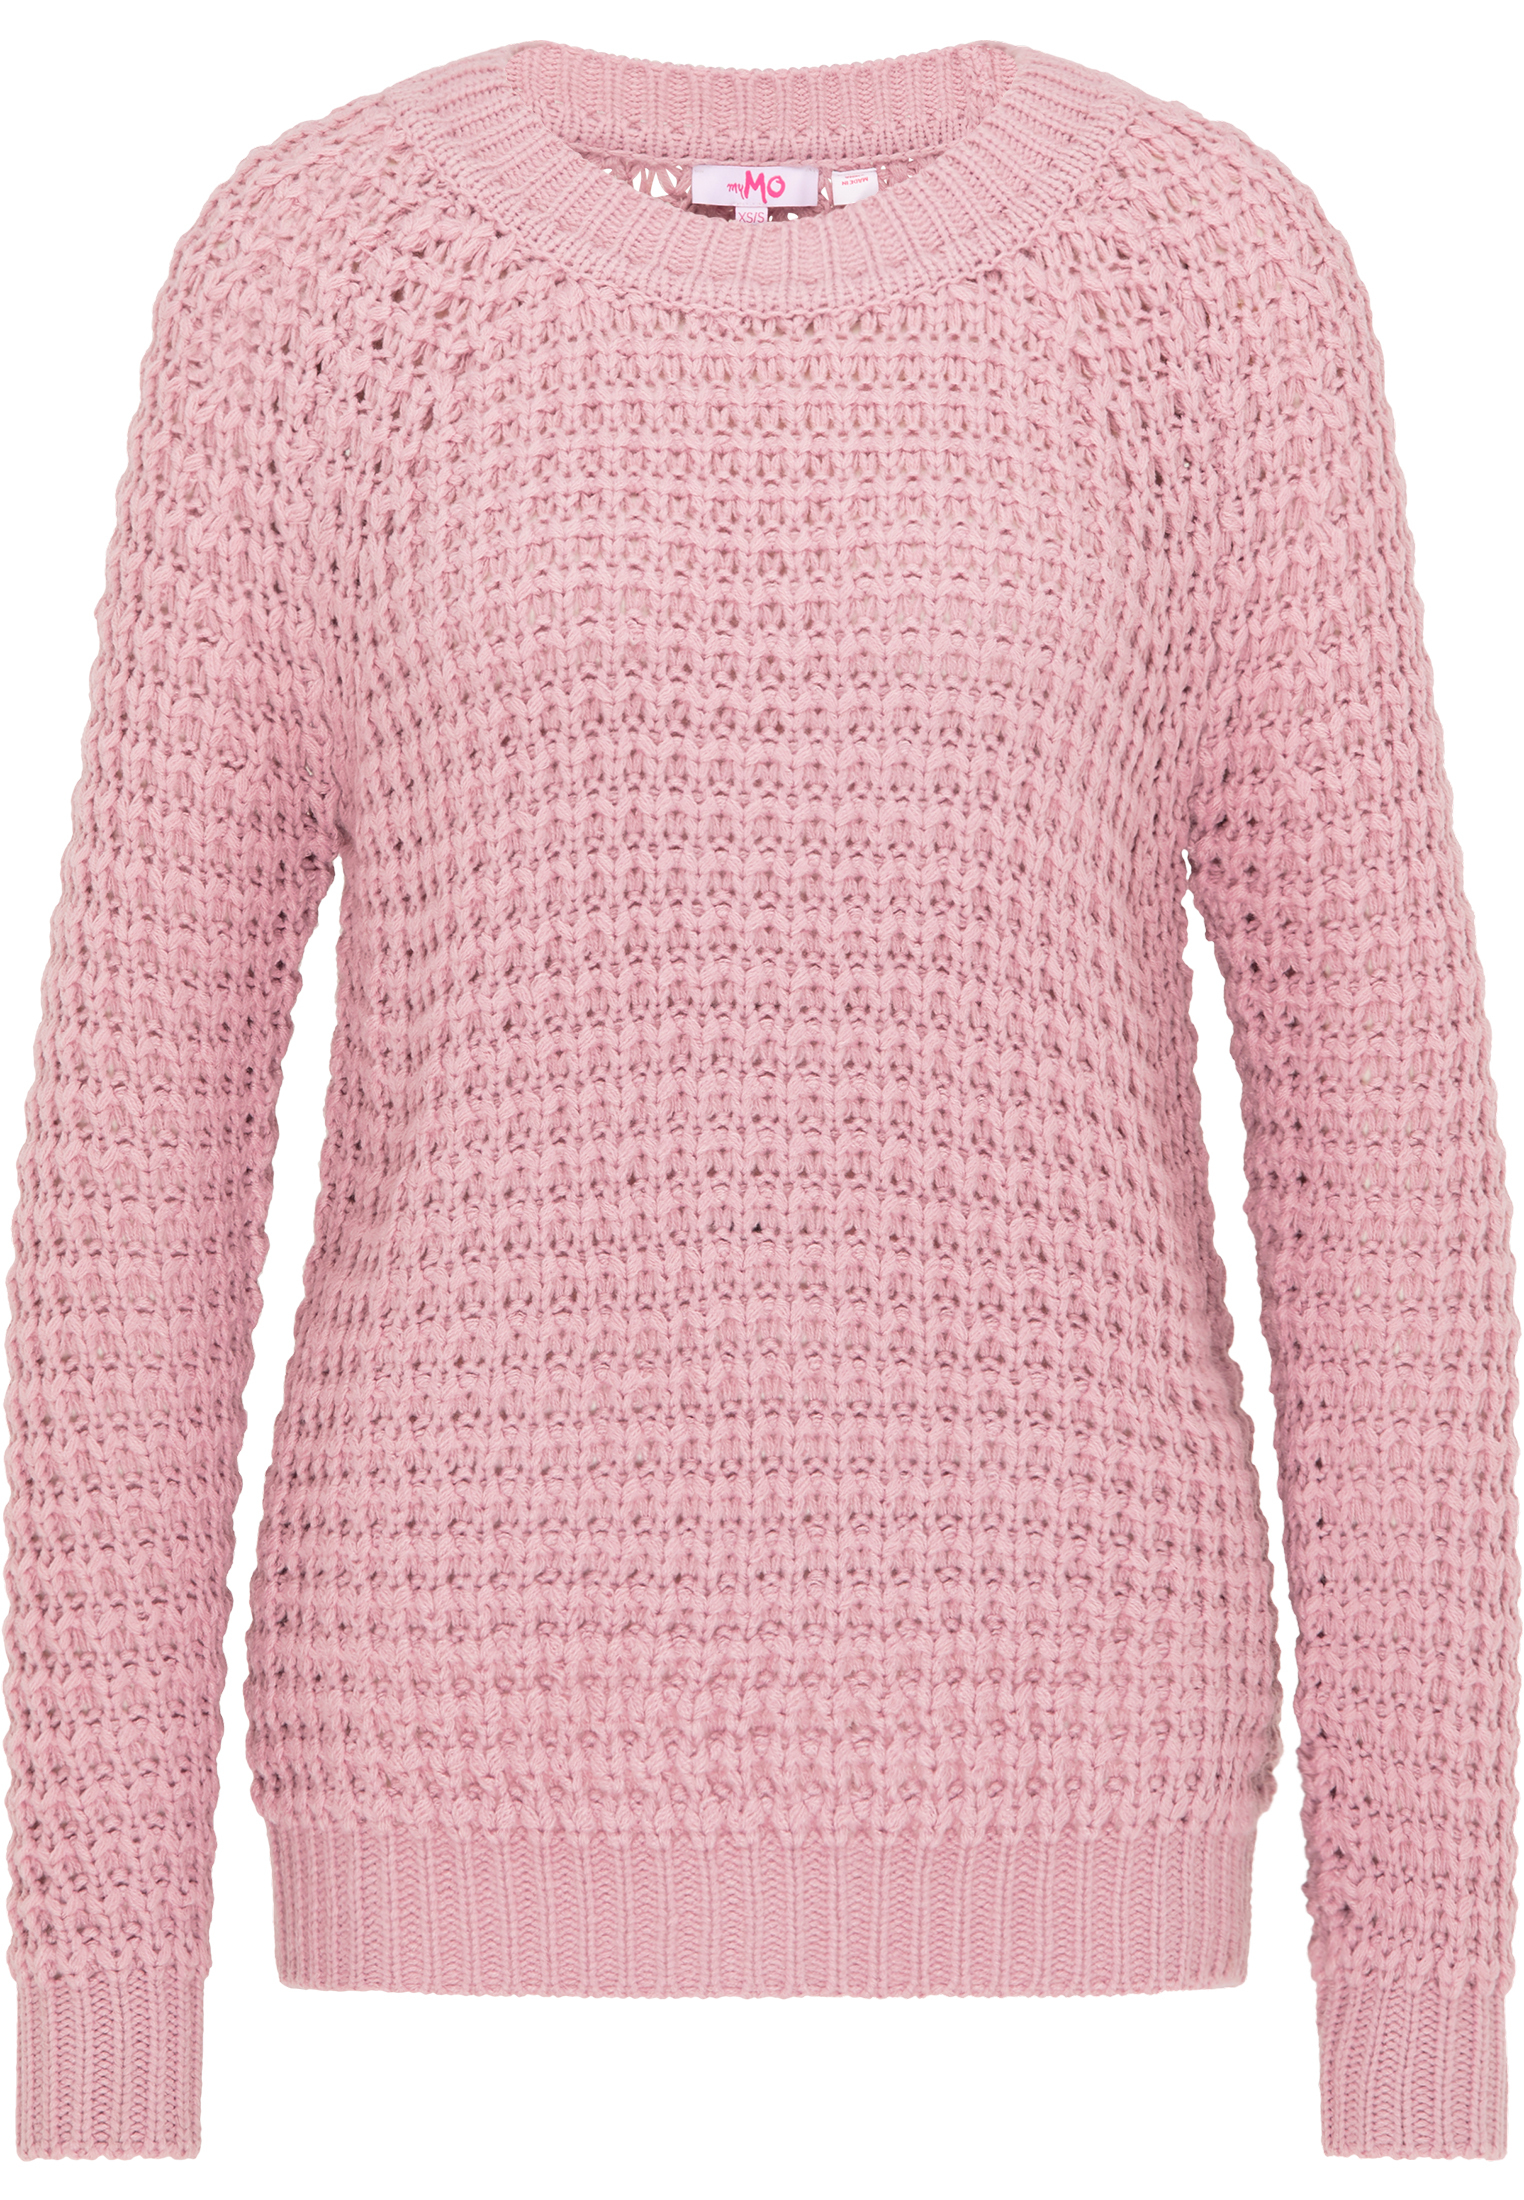 bRdzs Donna MYMO Pullover in Rosa 